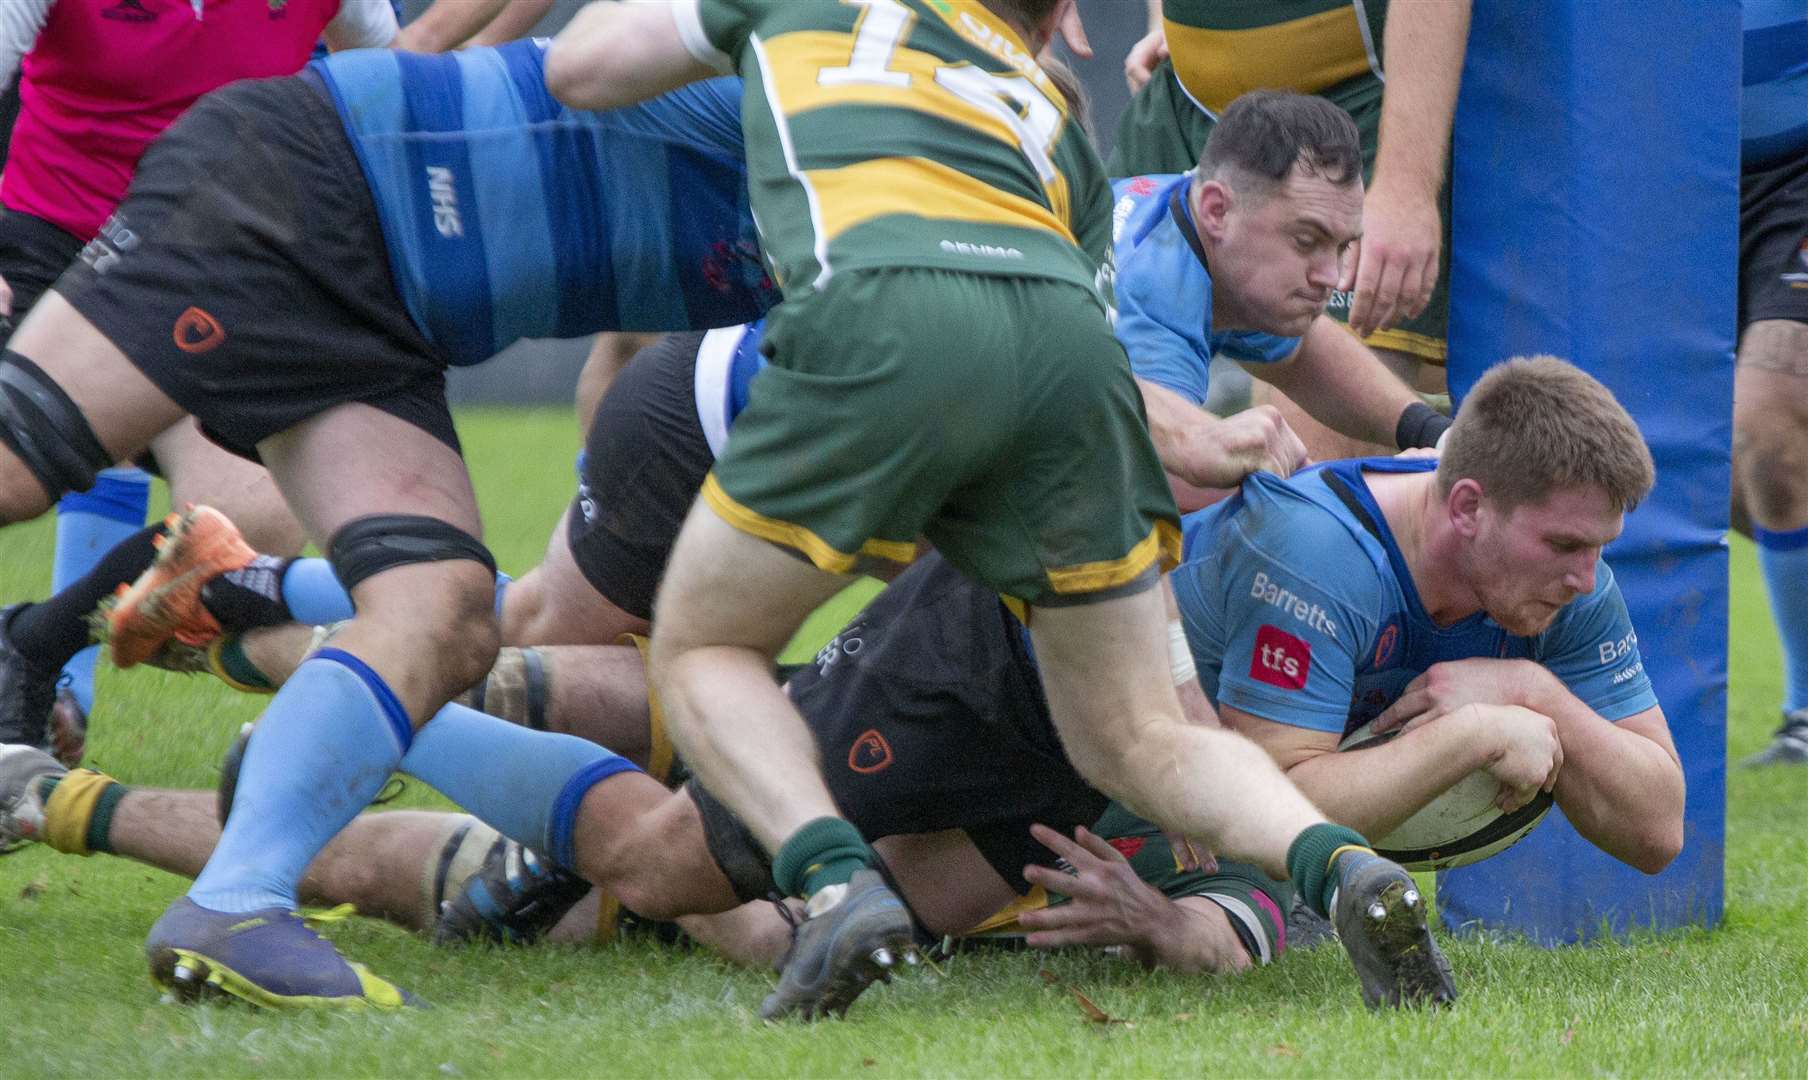 Canterbury go over for a try in National League 2 South at Barnes on Saturday. Picture: Phillipa Hilton (52594726)